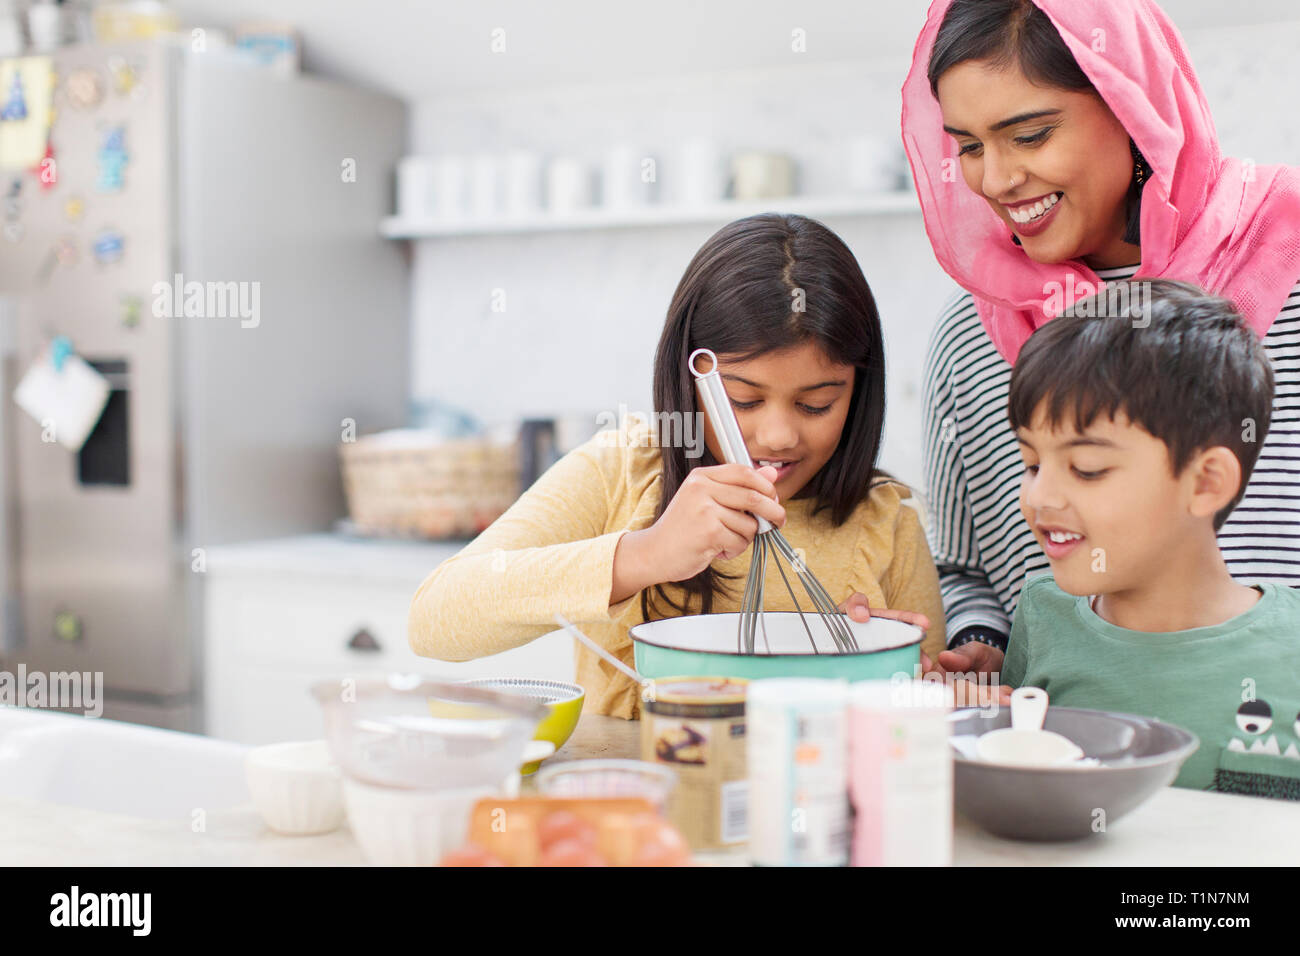 Mother in hijab baking with children in kitchen Stock Photo